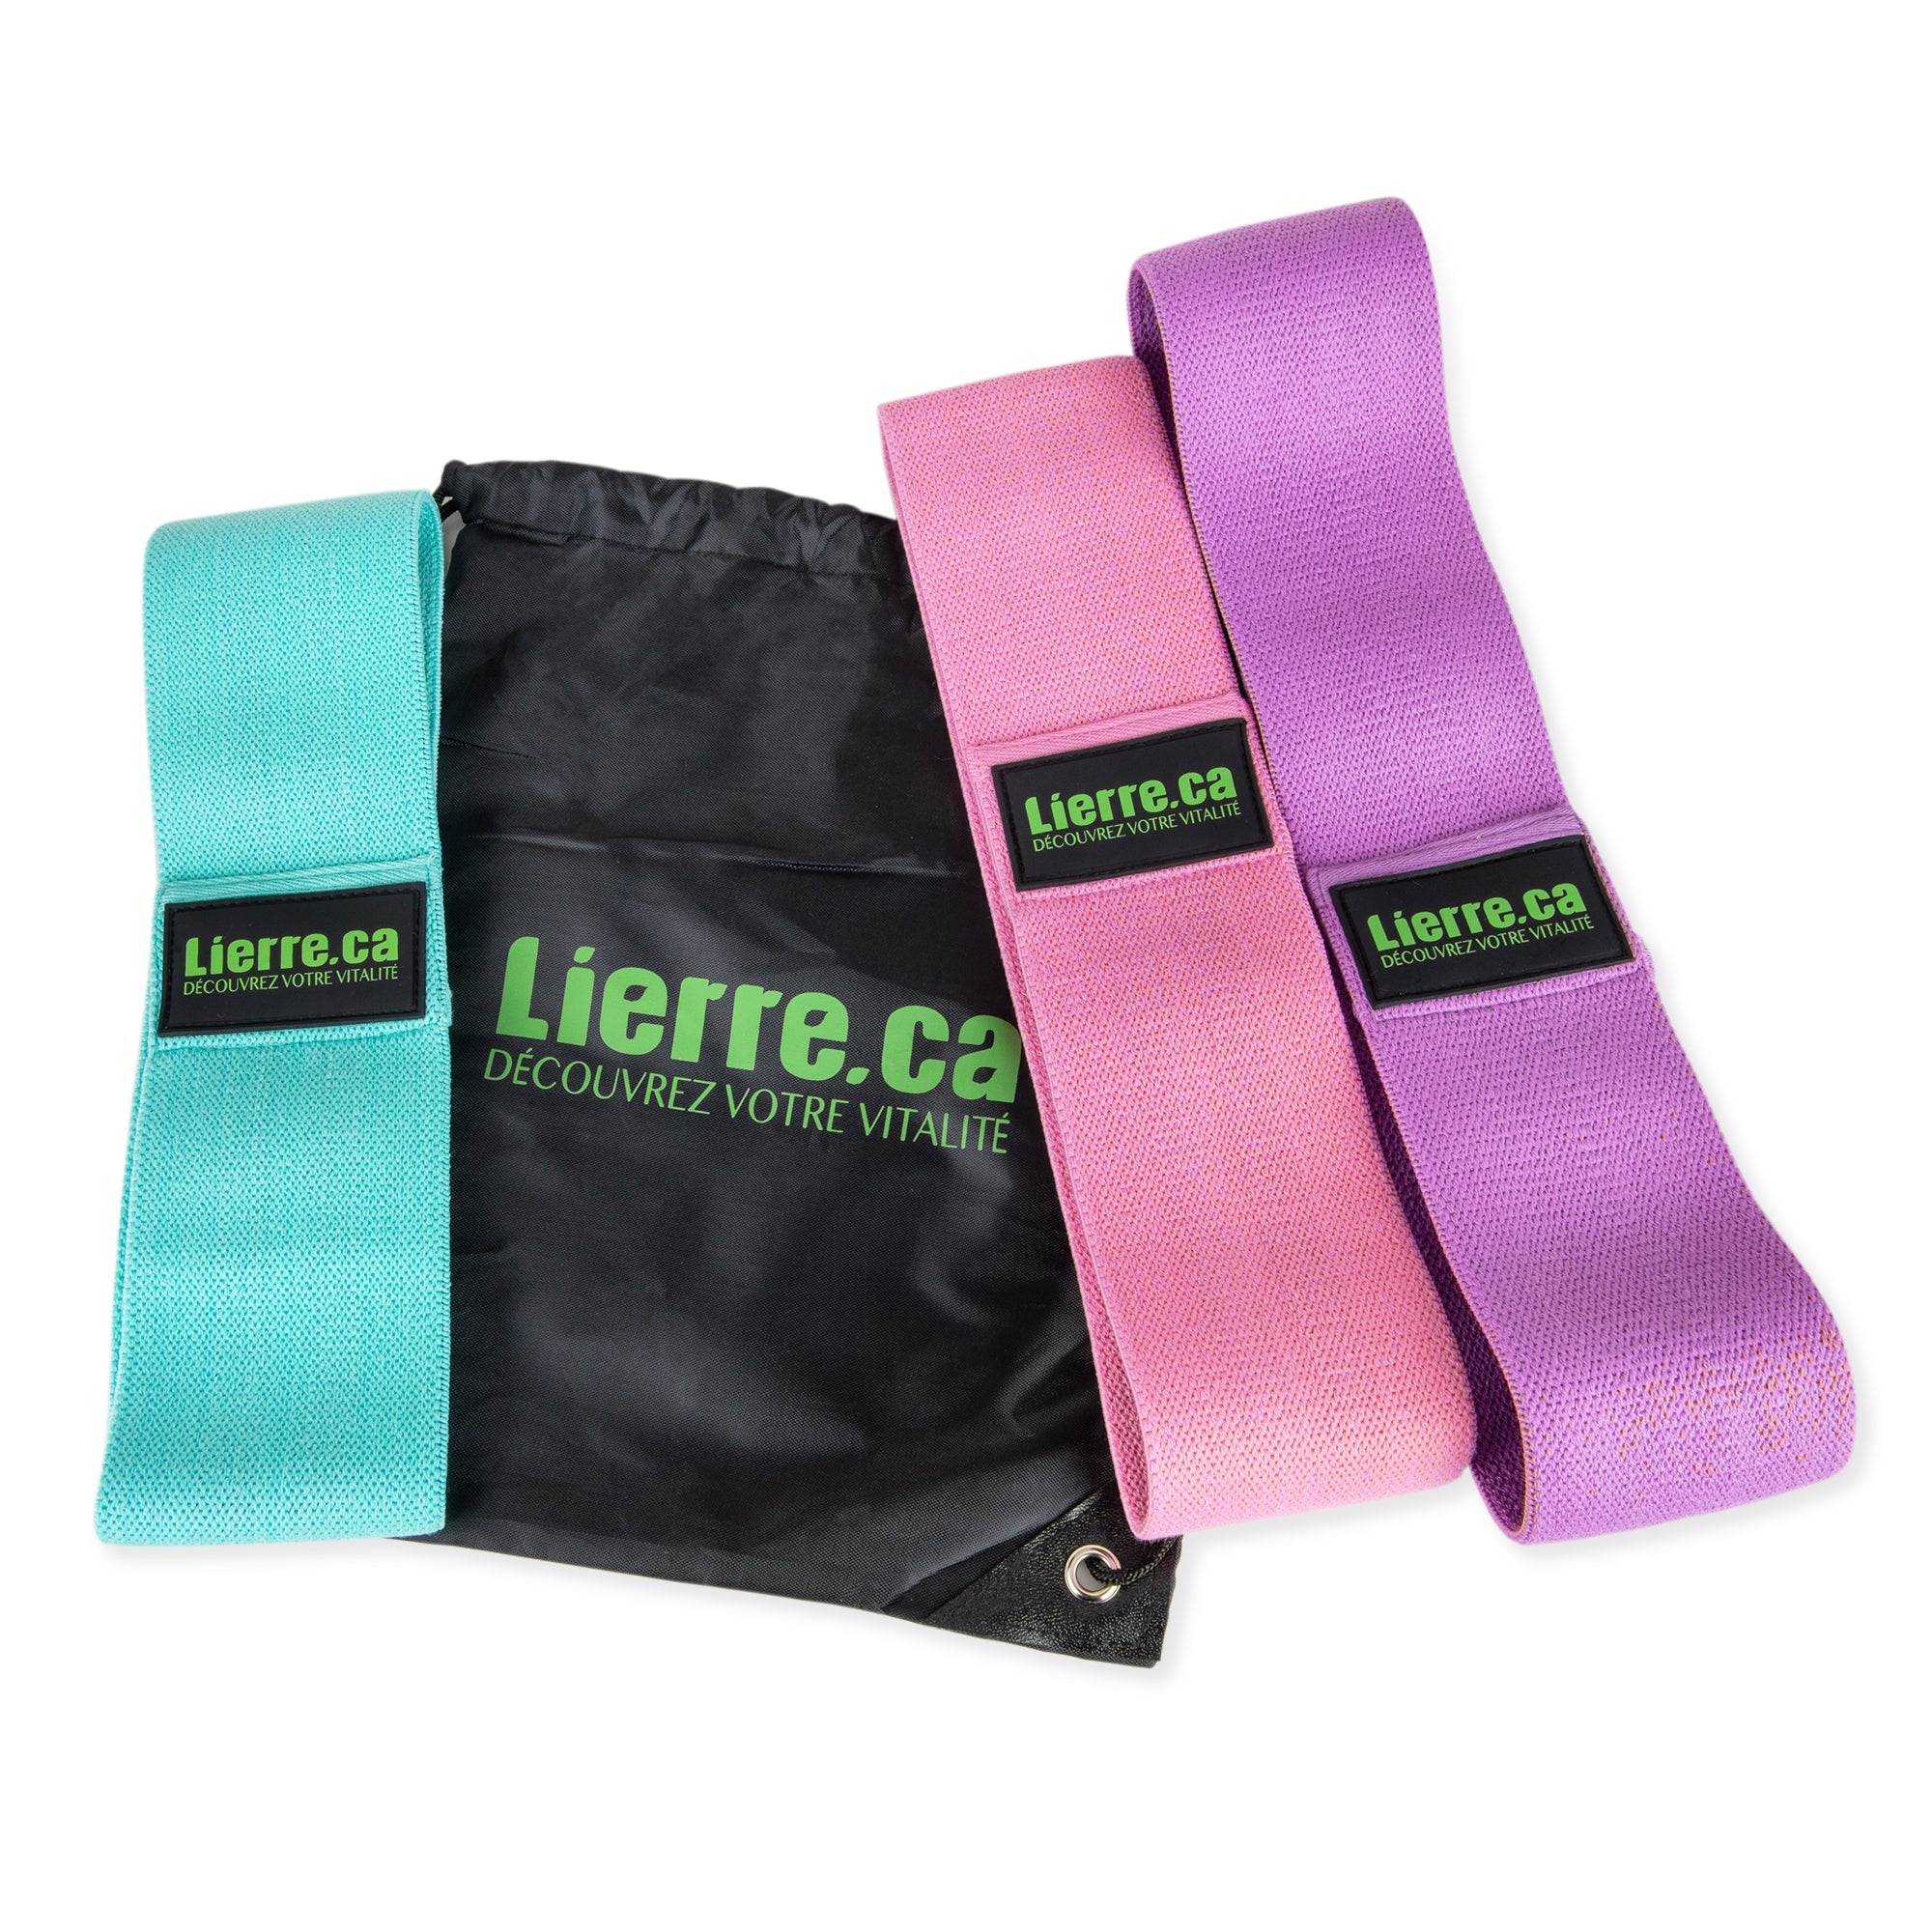 Lierre resistance band, theraband resistance band